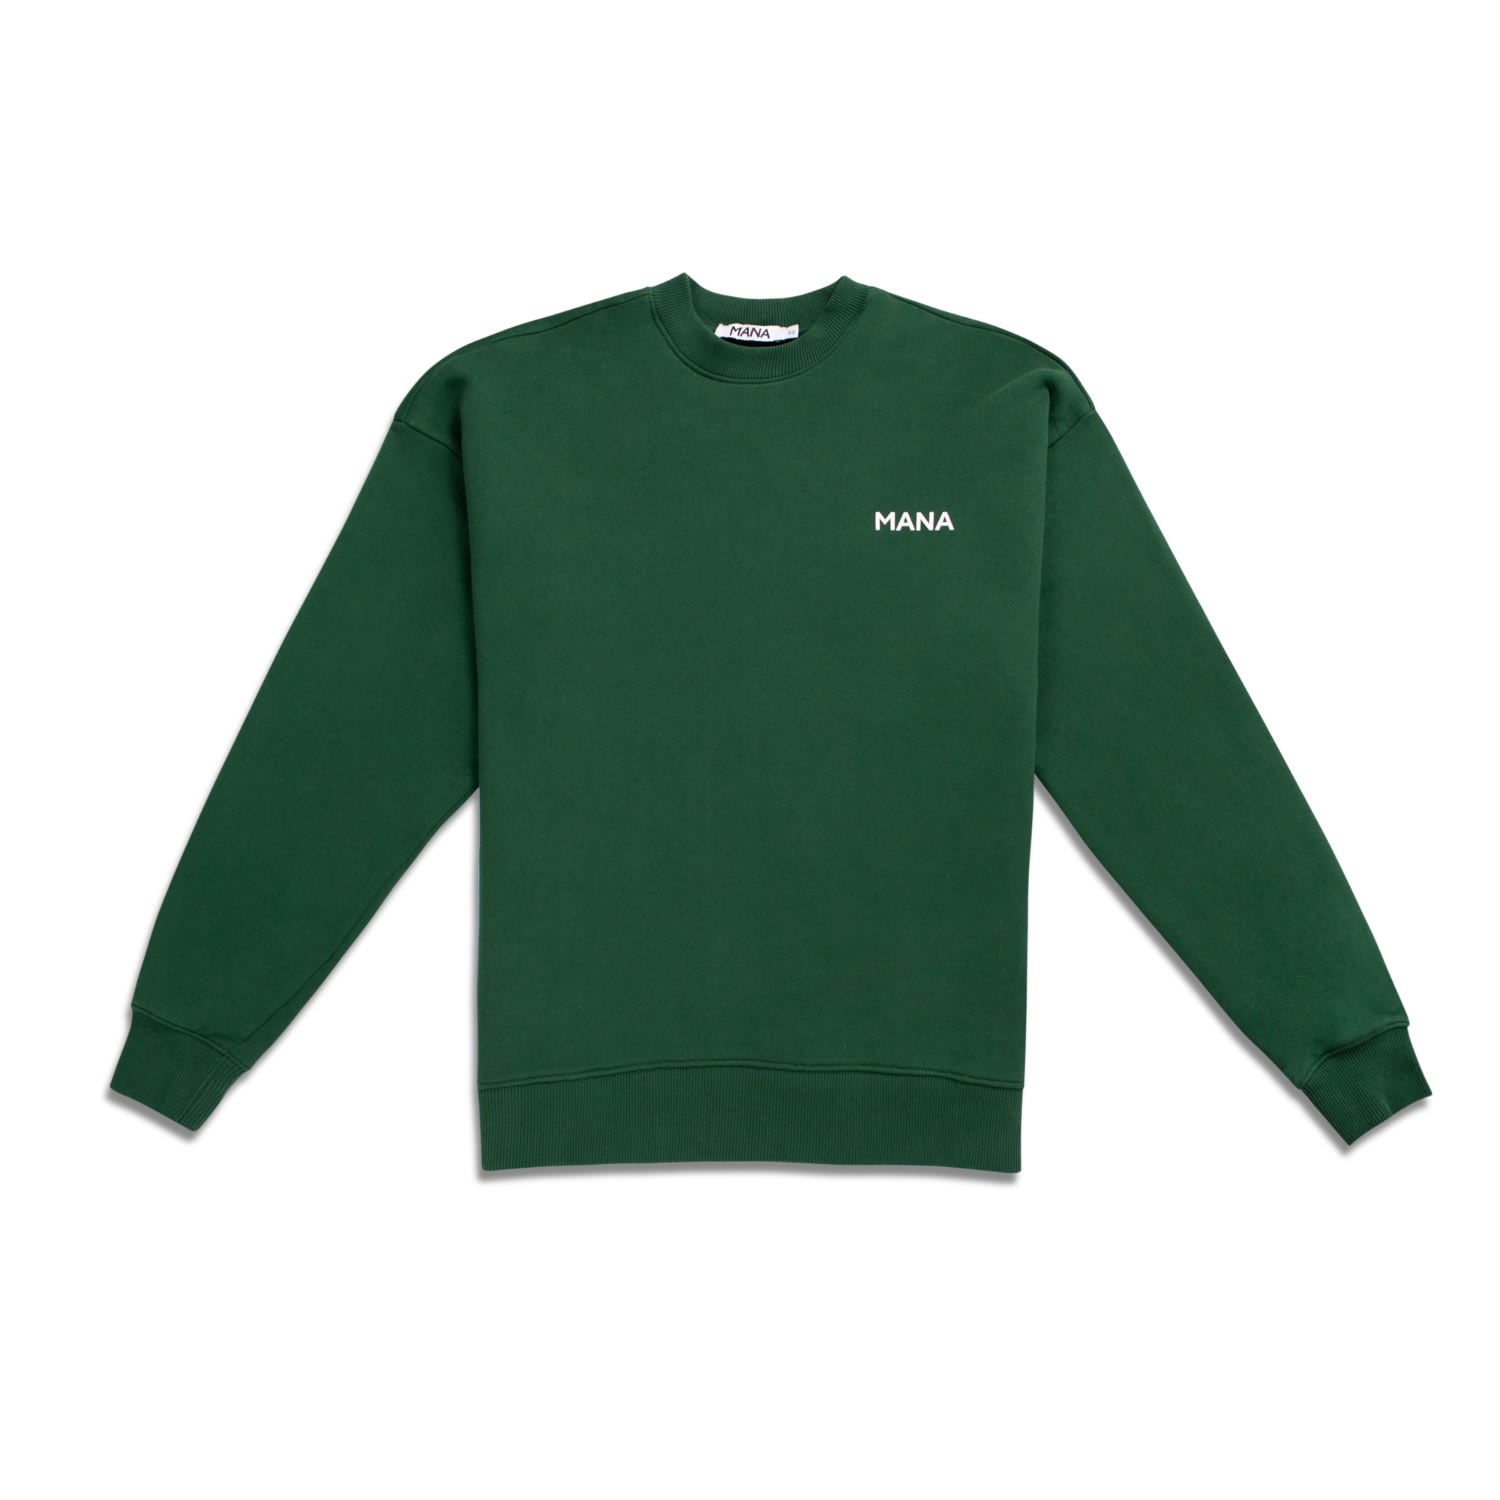 Deluxe Sweatshirt Mens In Pine Green Extra Small MANA The Movement